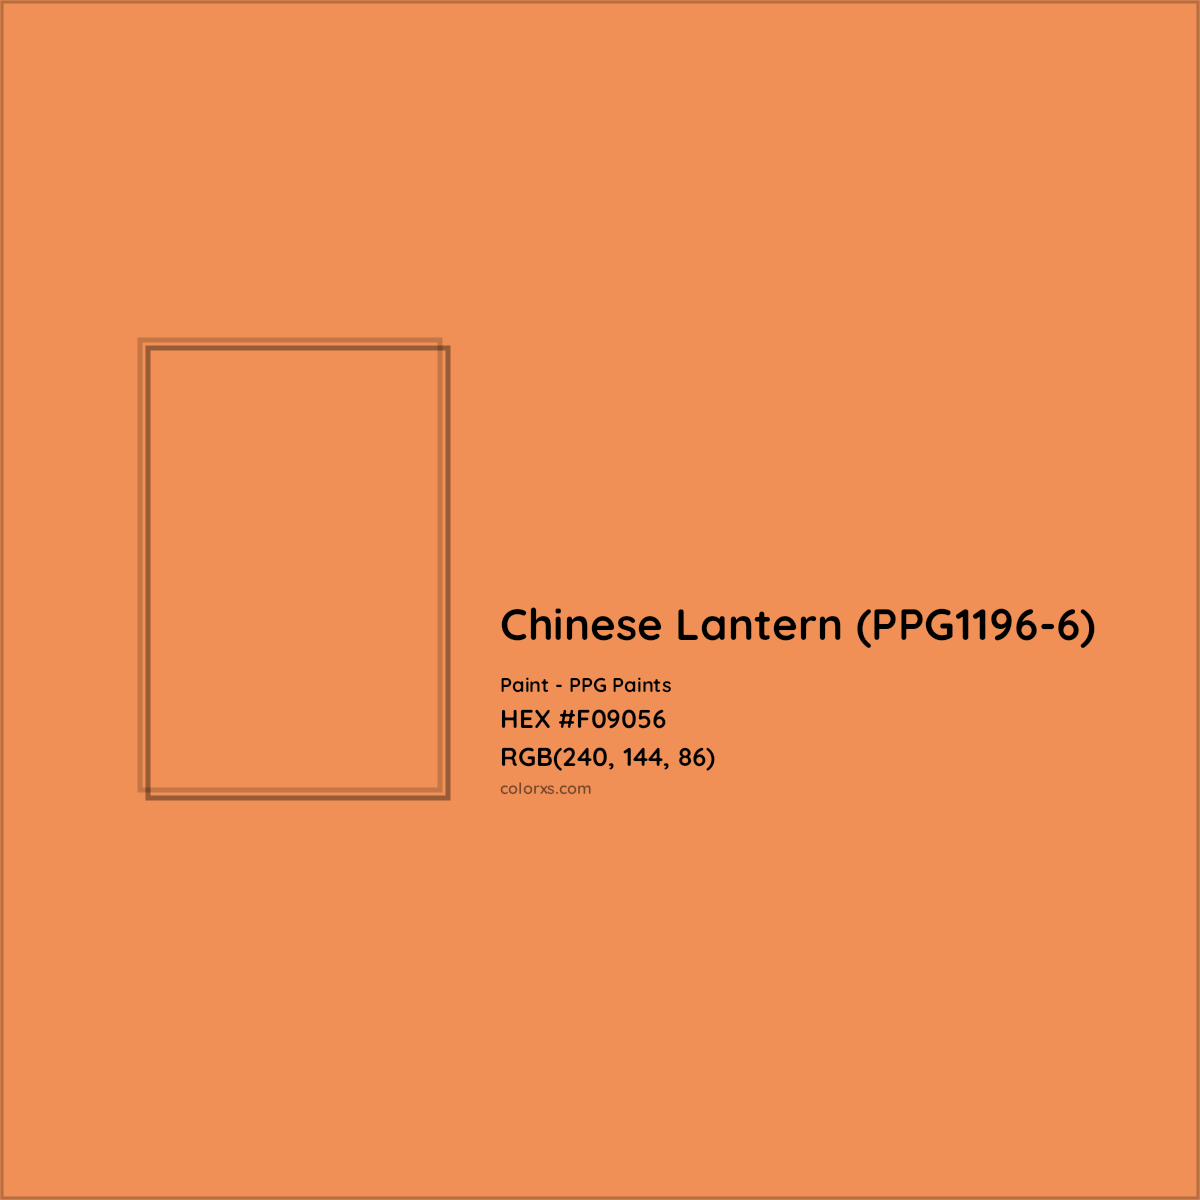 HEX #F09056 Chinese Lantern (PPG1196-6) Paint PPG Paints - Color Code